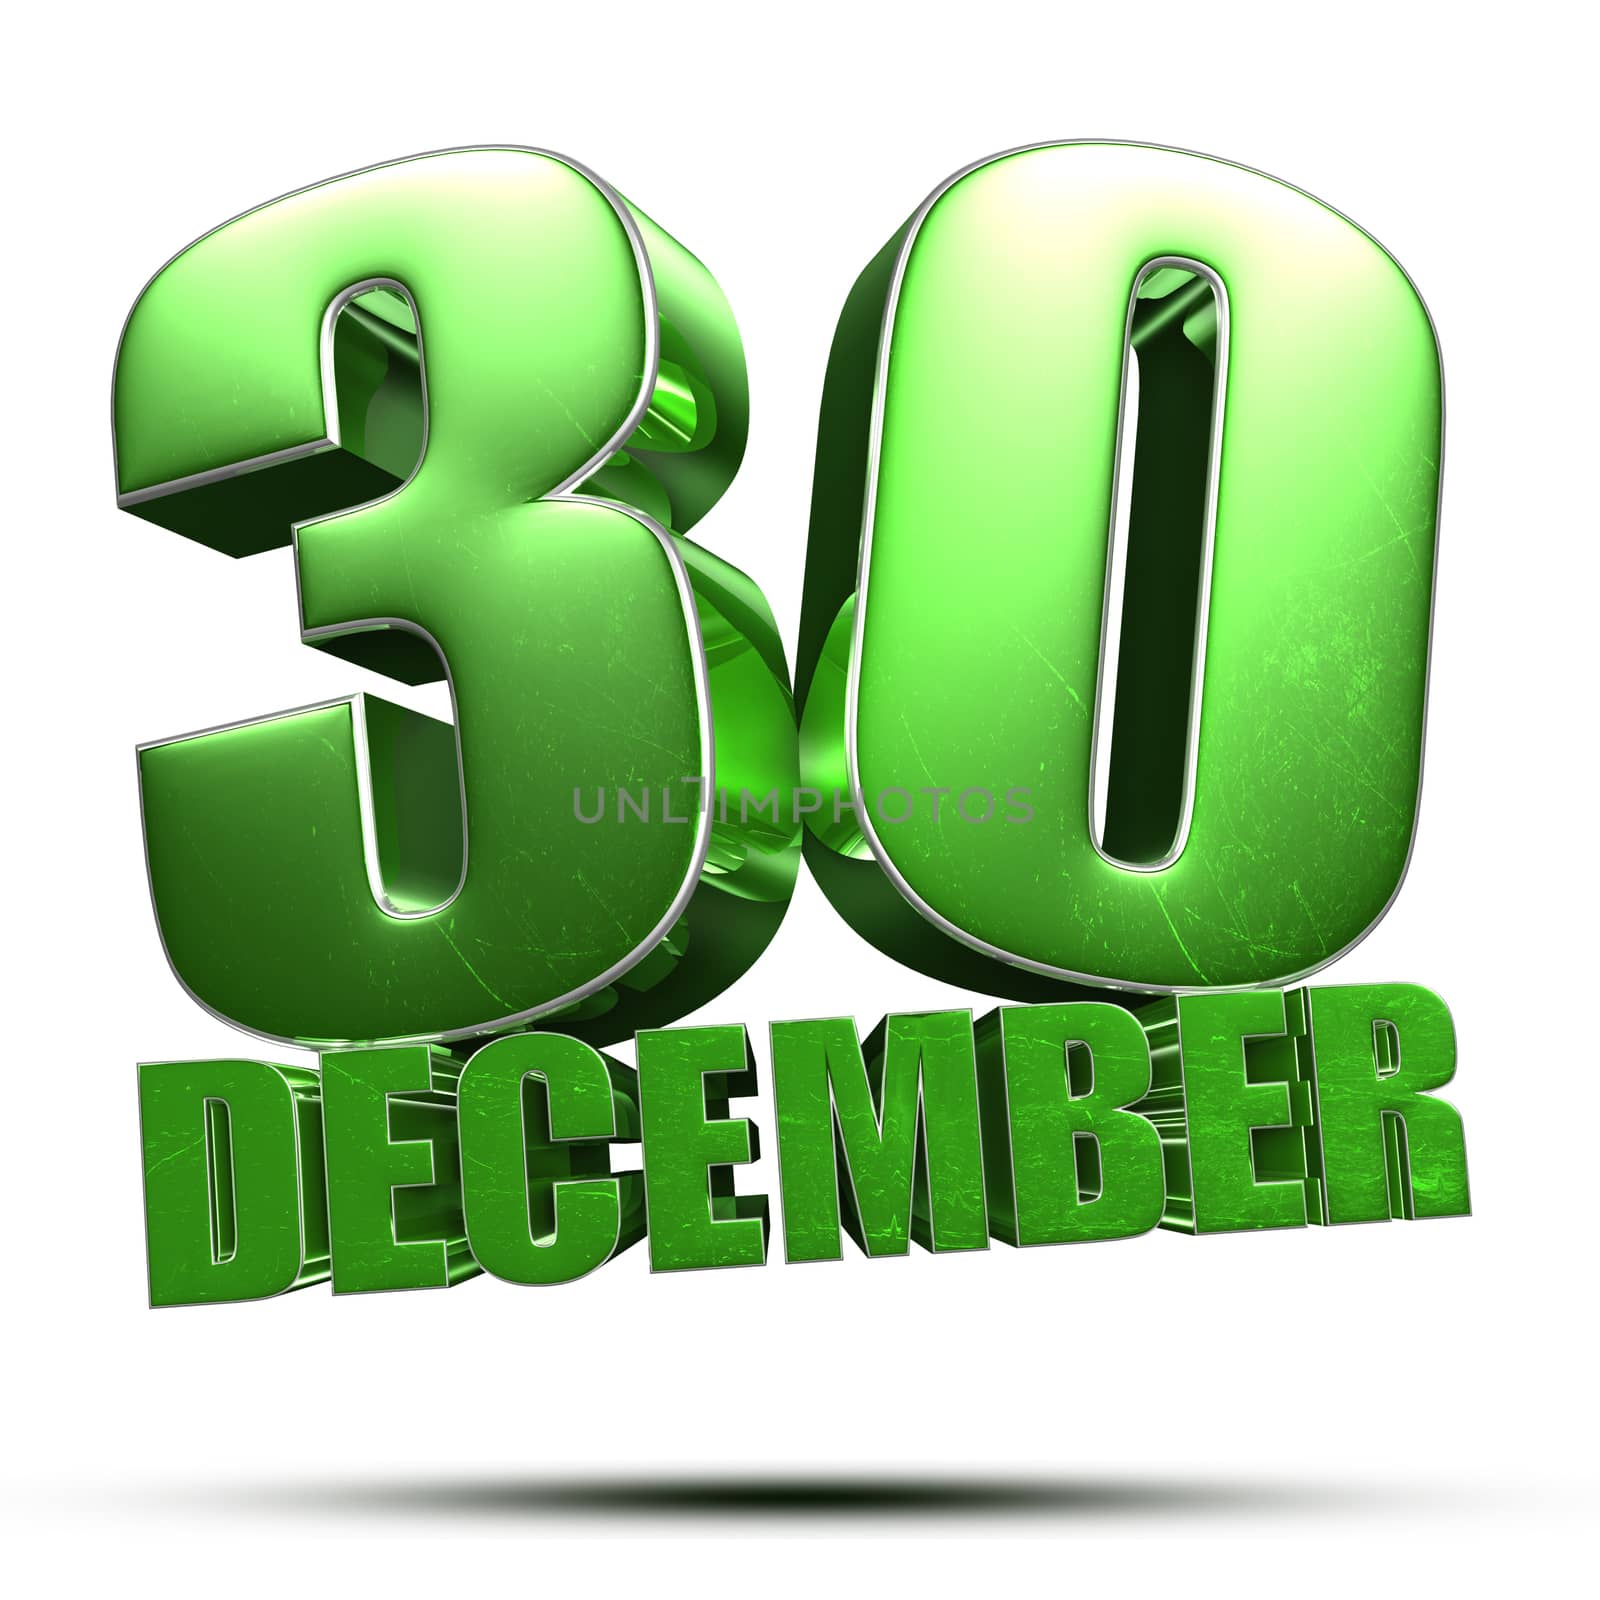 Day 30 of month december green 3d illustration isolated on white background. (With Clipping Path).